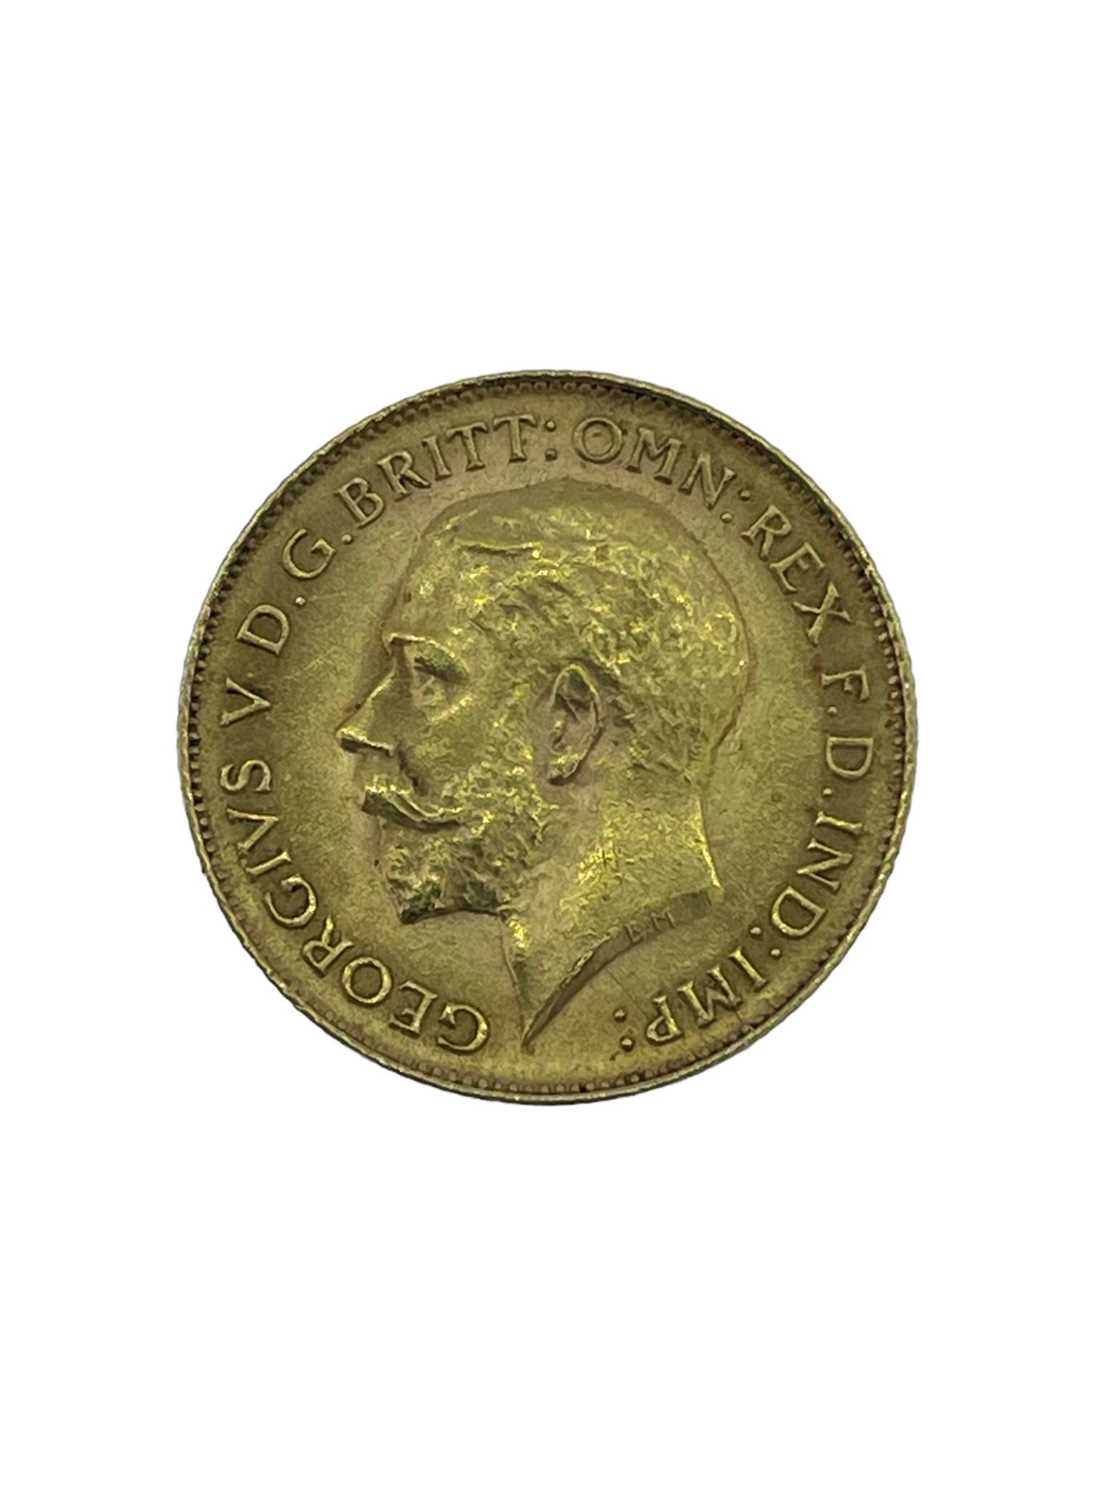 GEORGE V GOLD HALF SOVEREIGN, 1912, 4.0gms Provenance: private collection Carmarthenshire, consigned - Image 2 of 2